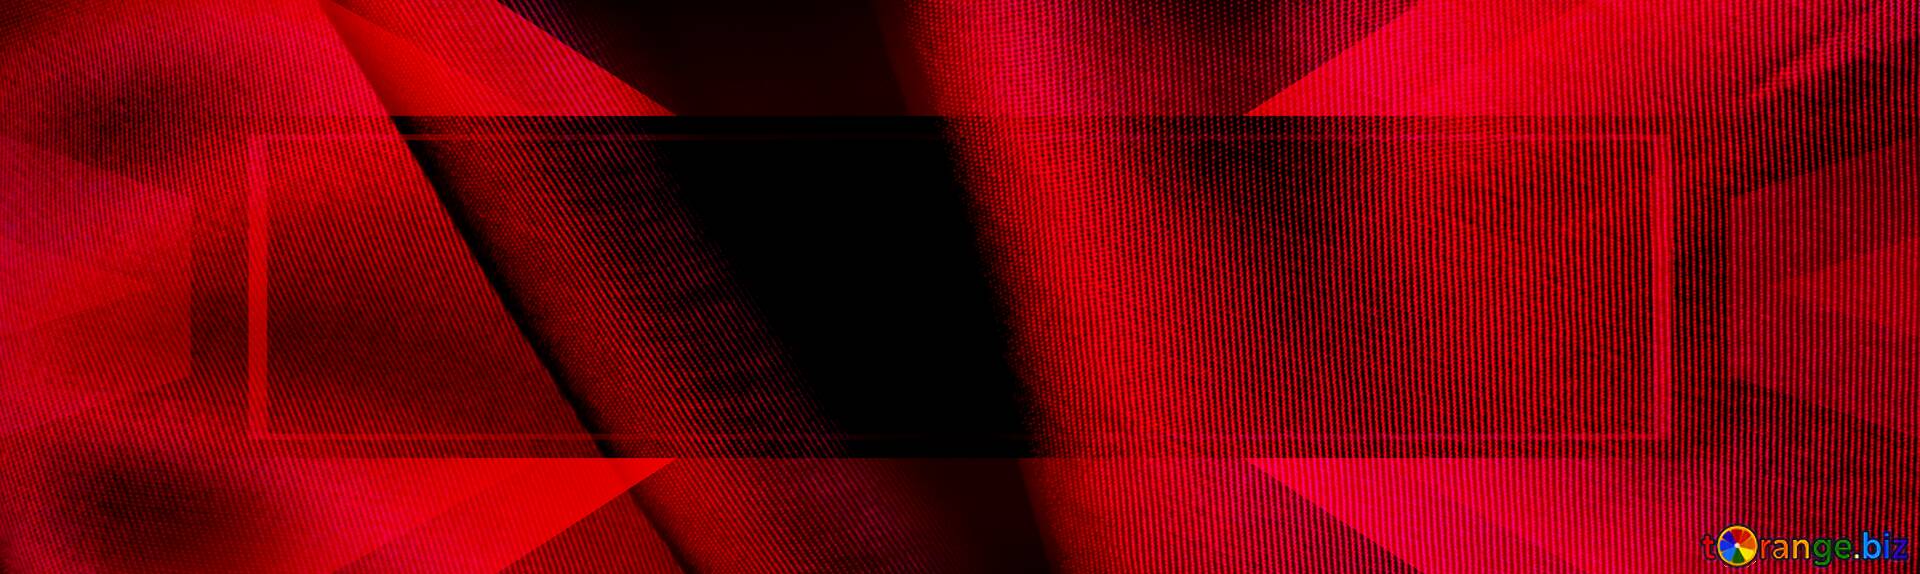 Download free picture Red cloth background Design Layout Background Banner  on CC-BY License ~ Free Image Stock  ~ fx №190185